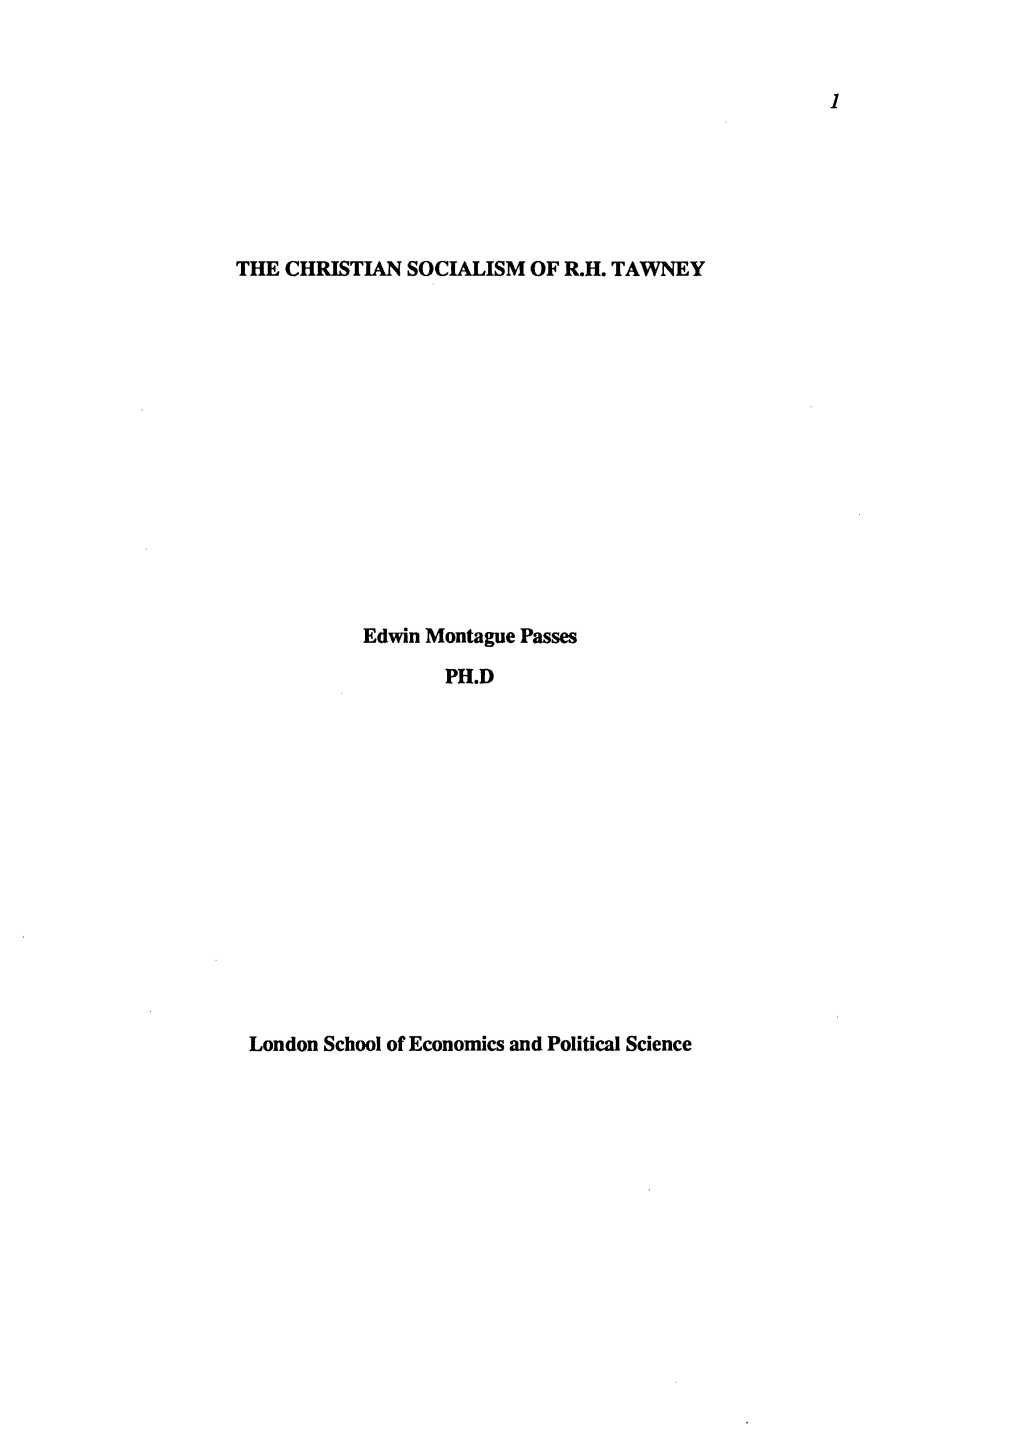 THE CHRISTIAN SOCIALISM of R.H. TAWNEY Edwin Montague Passes